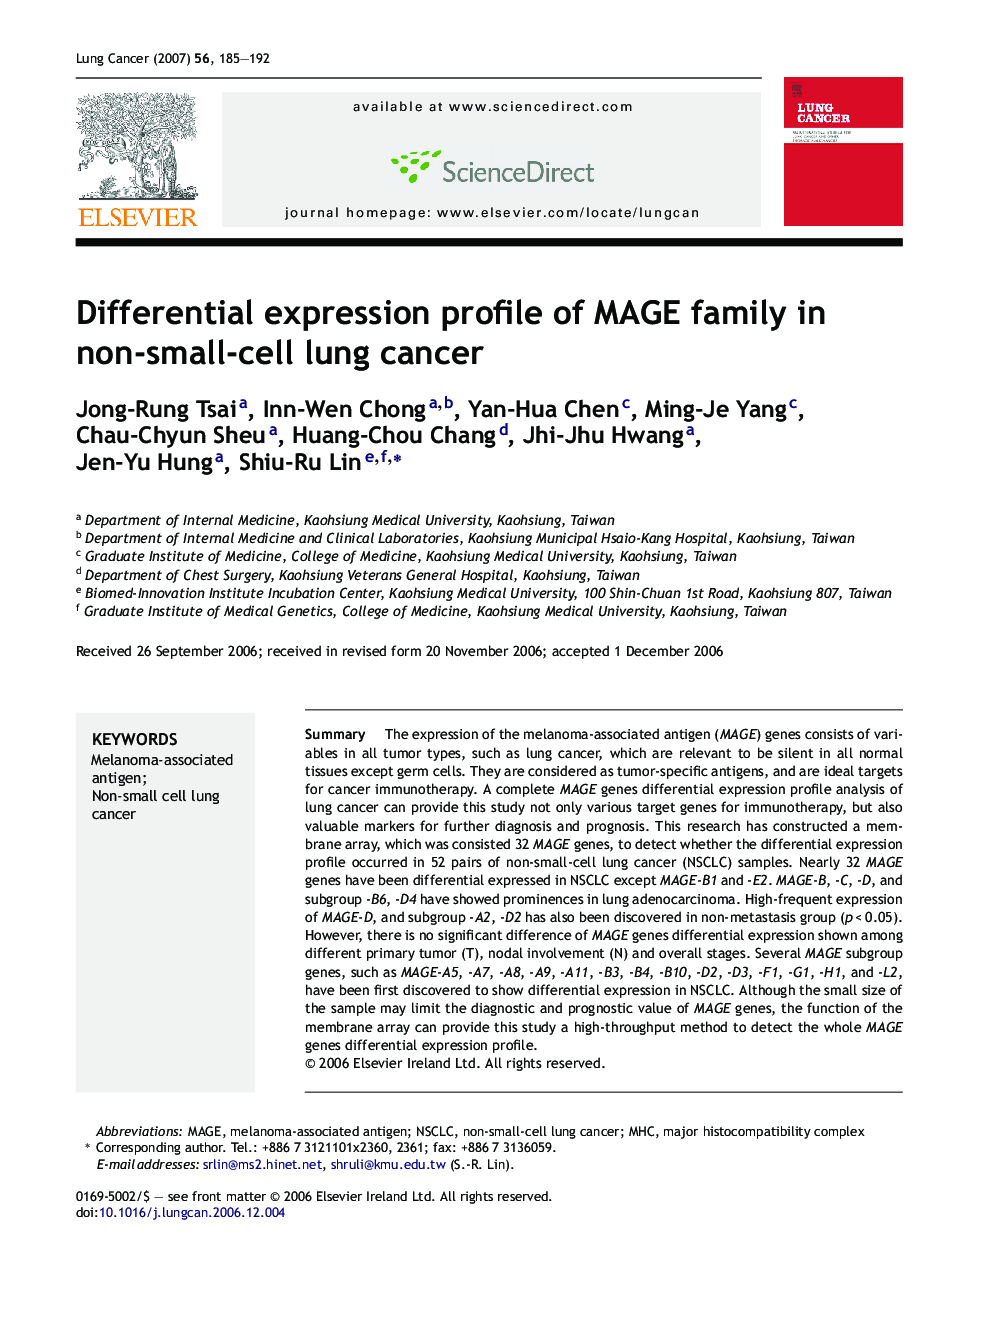 Differential expression profile of MAGE family in non-small-cell lung cancer